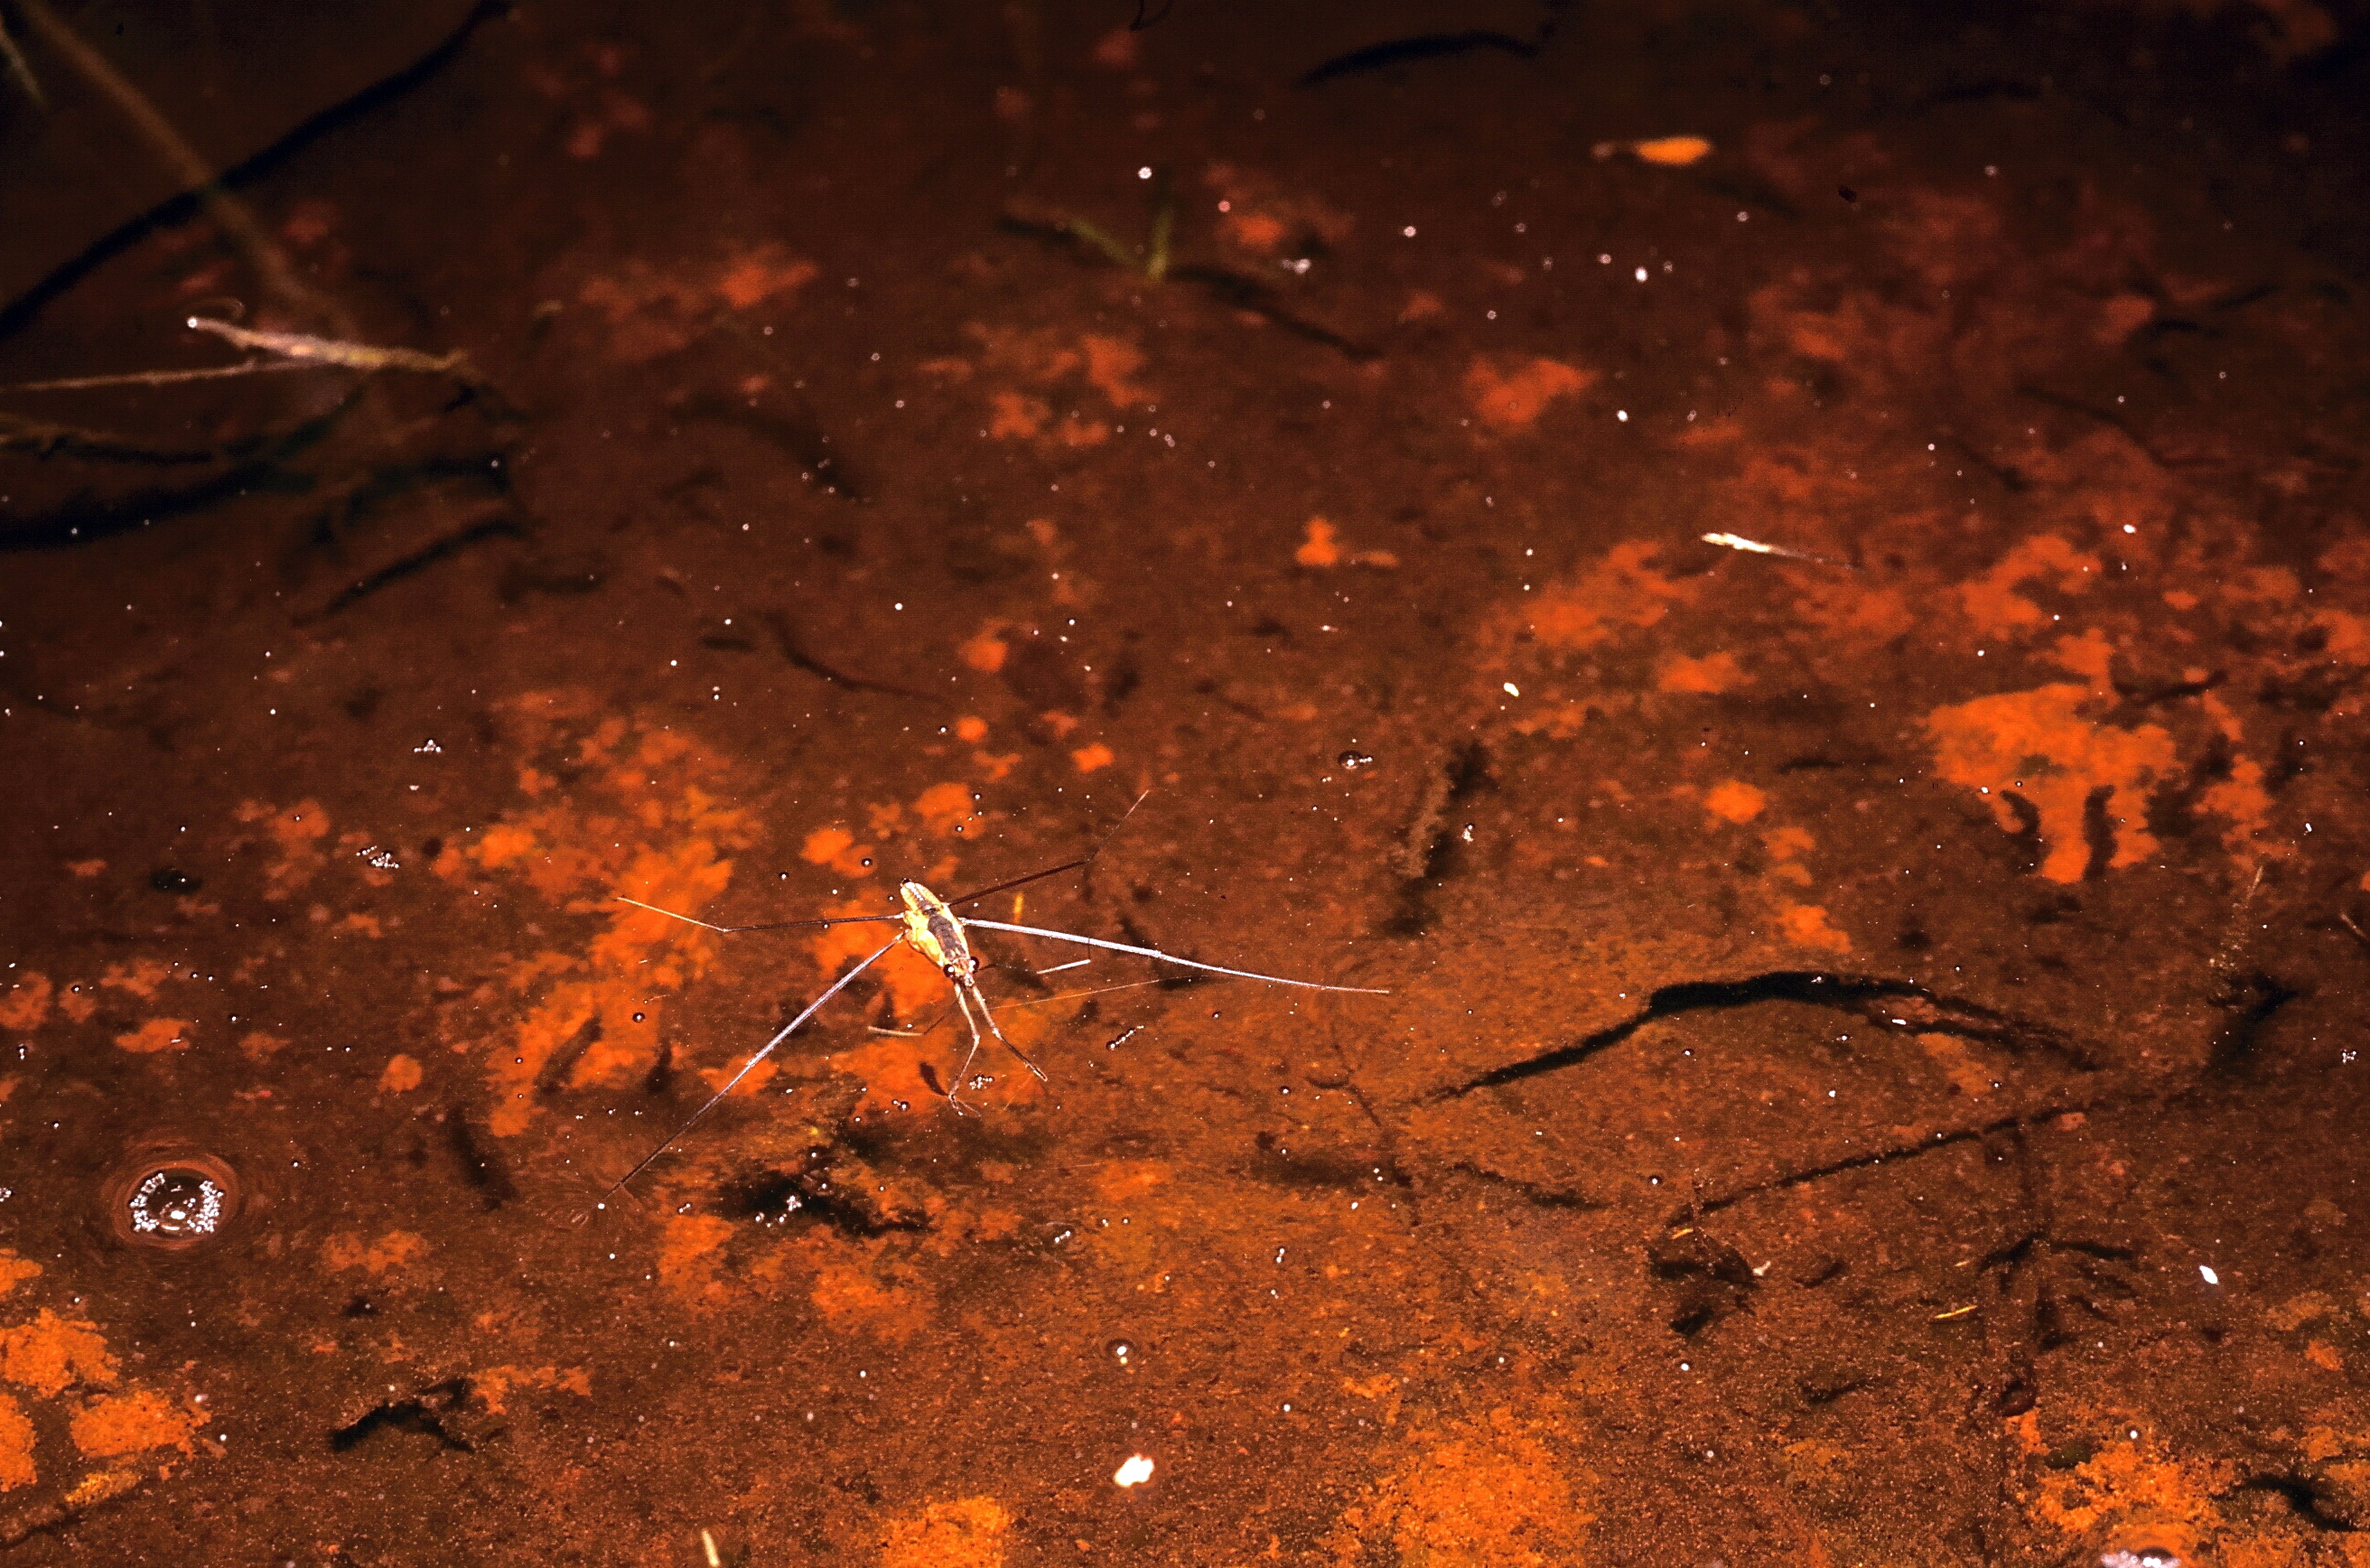 Photo of a water strider